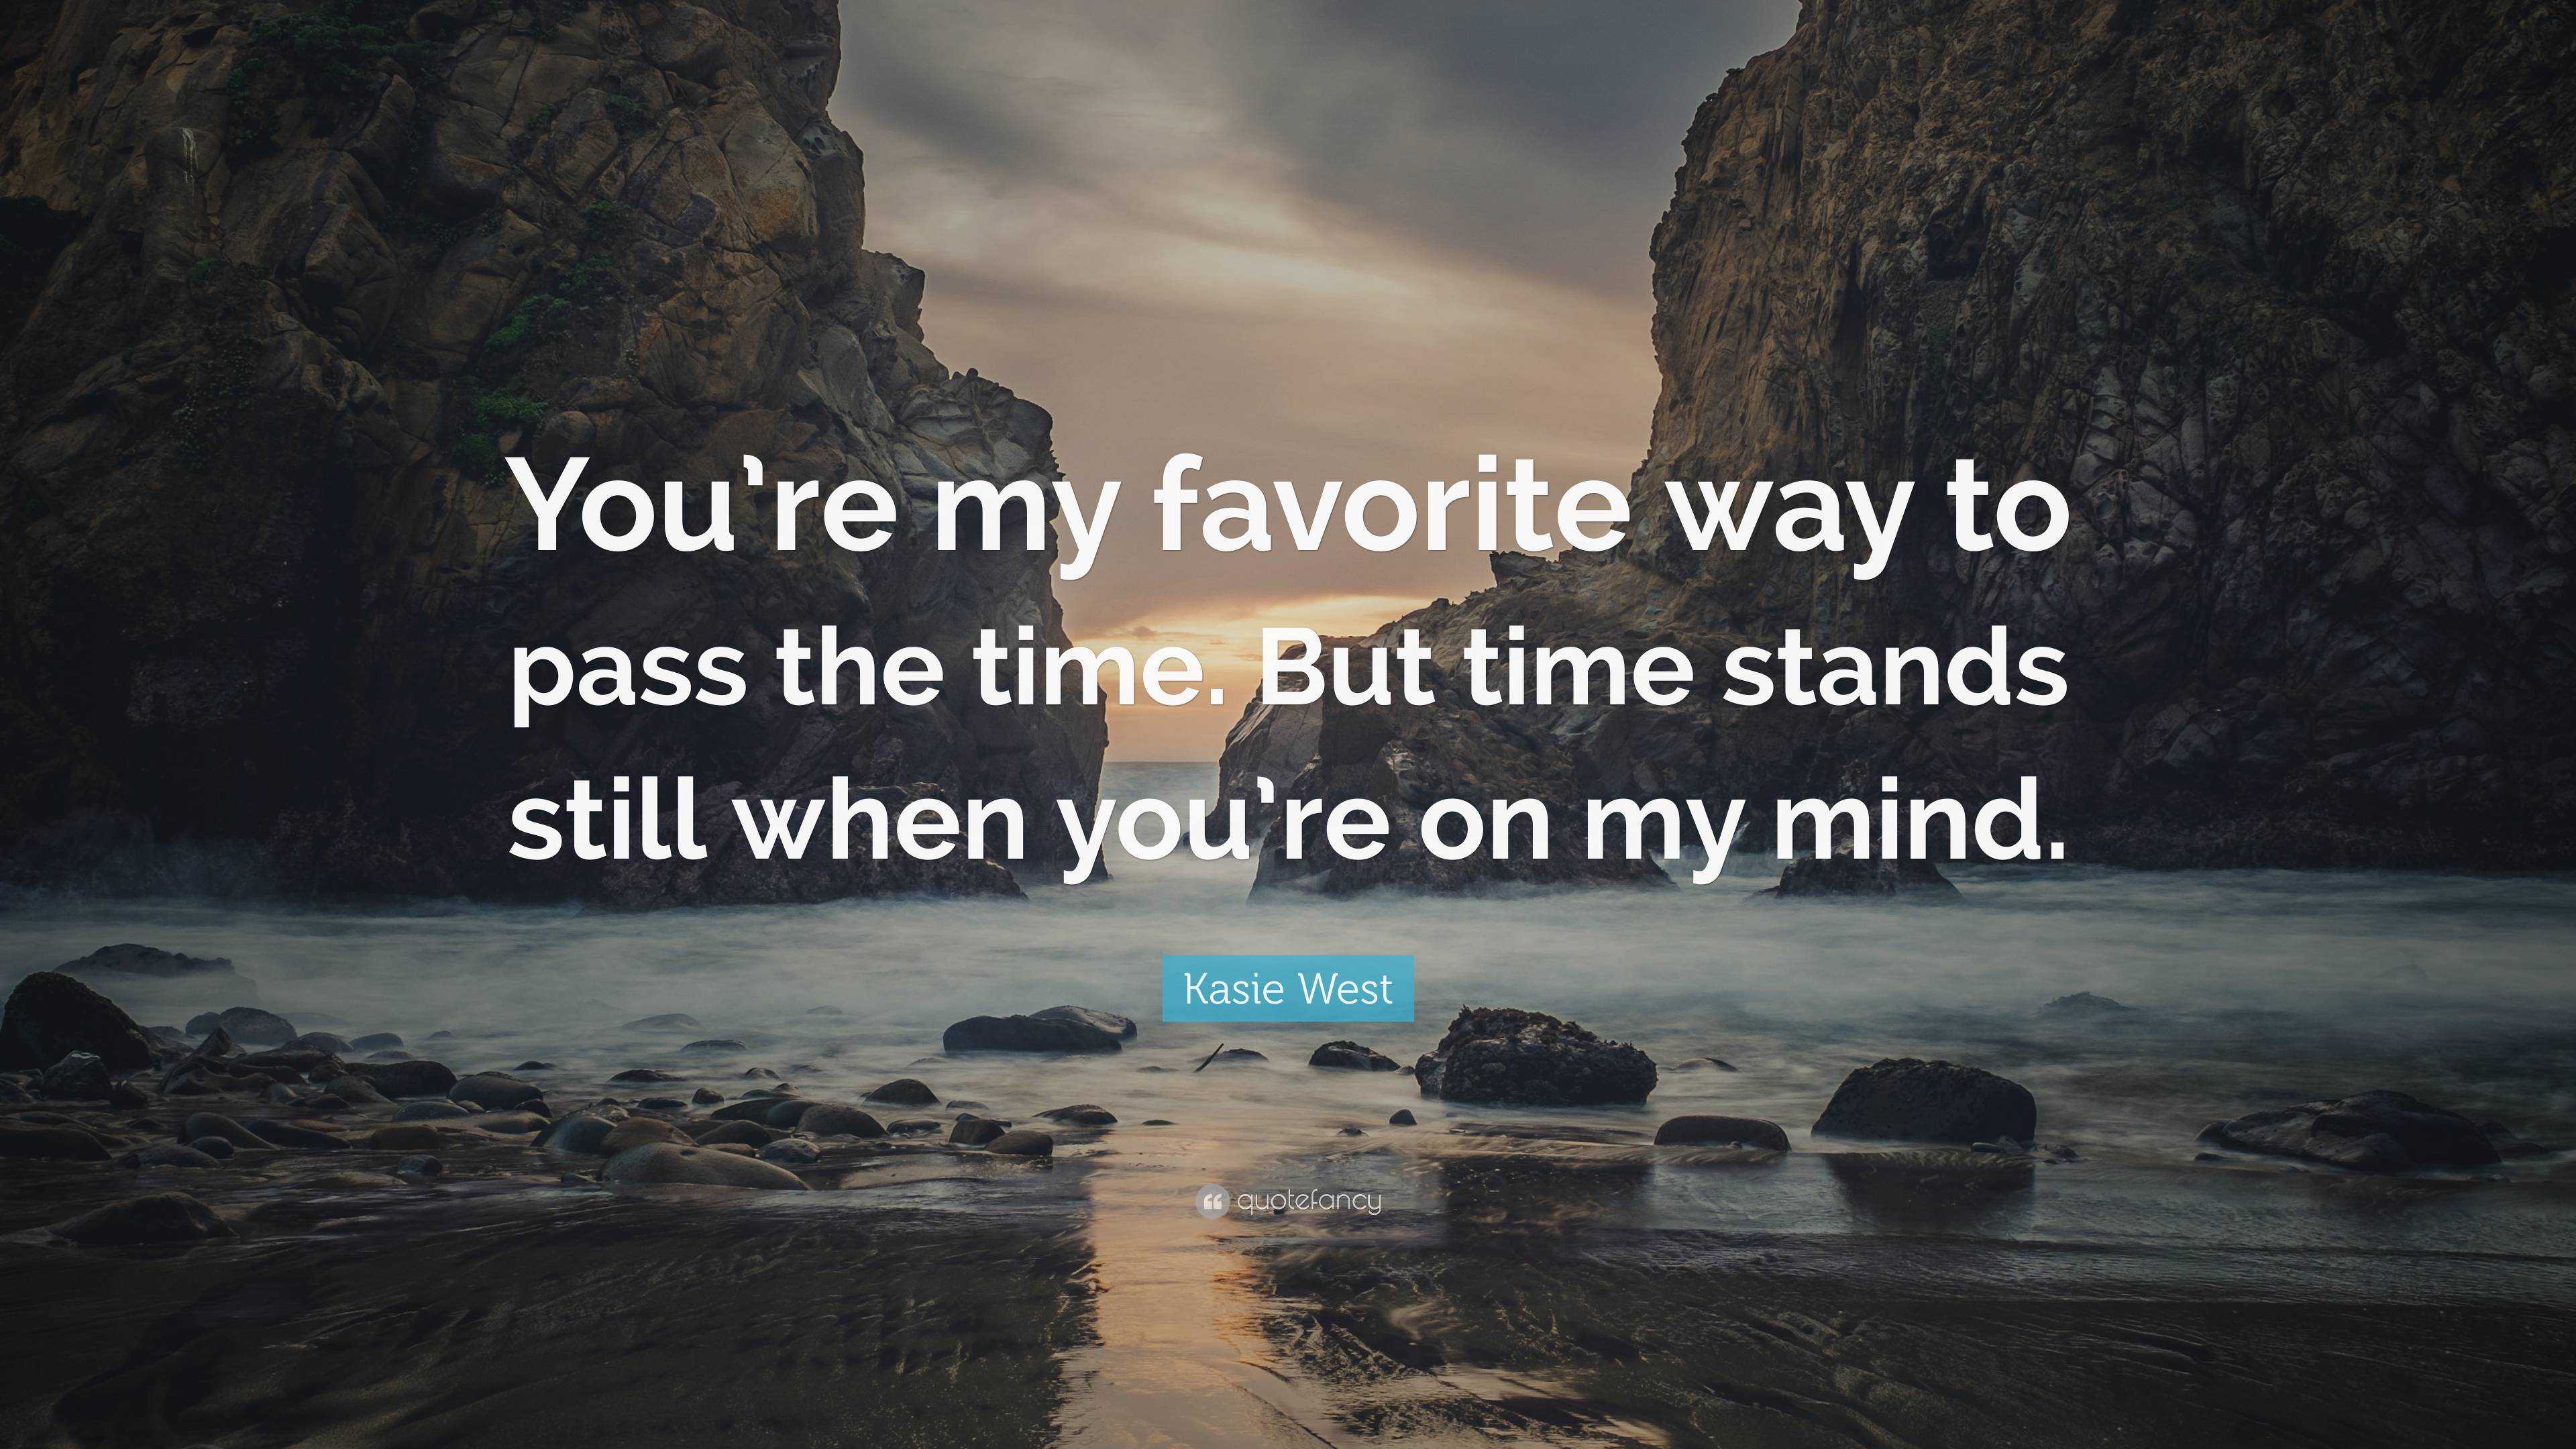 Kasie West Quote: “You’re my favorite way to pass the time. But time ...